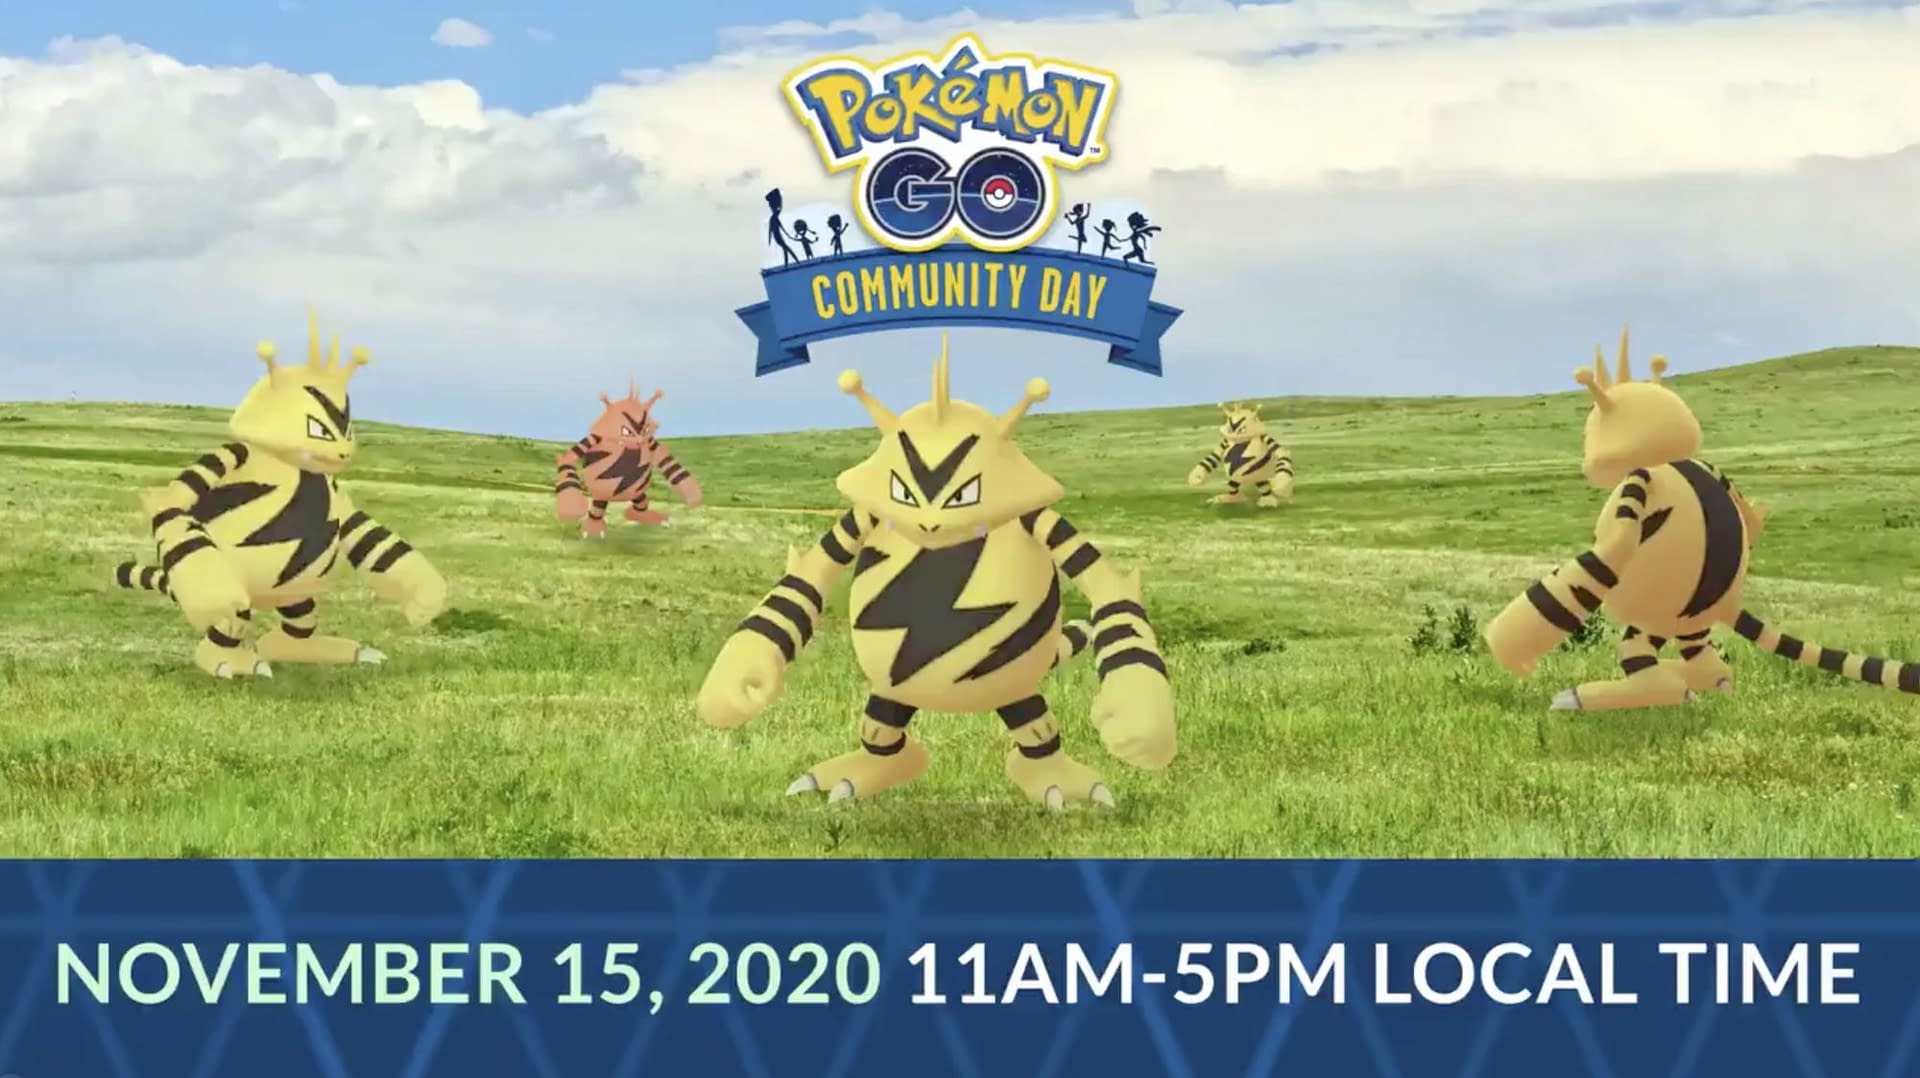 Pokémon Go Electabuzz Community Day guide: start time and best